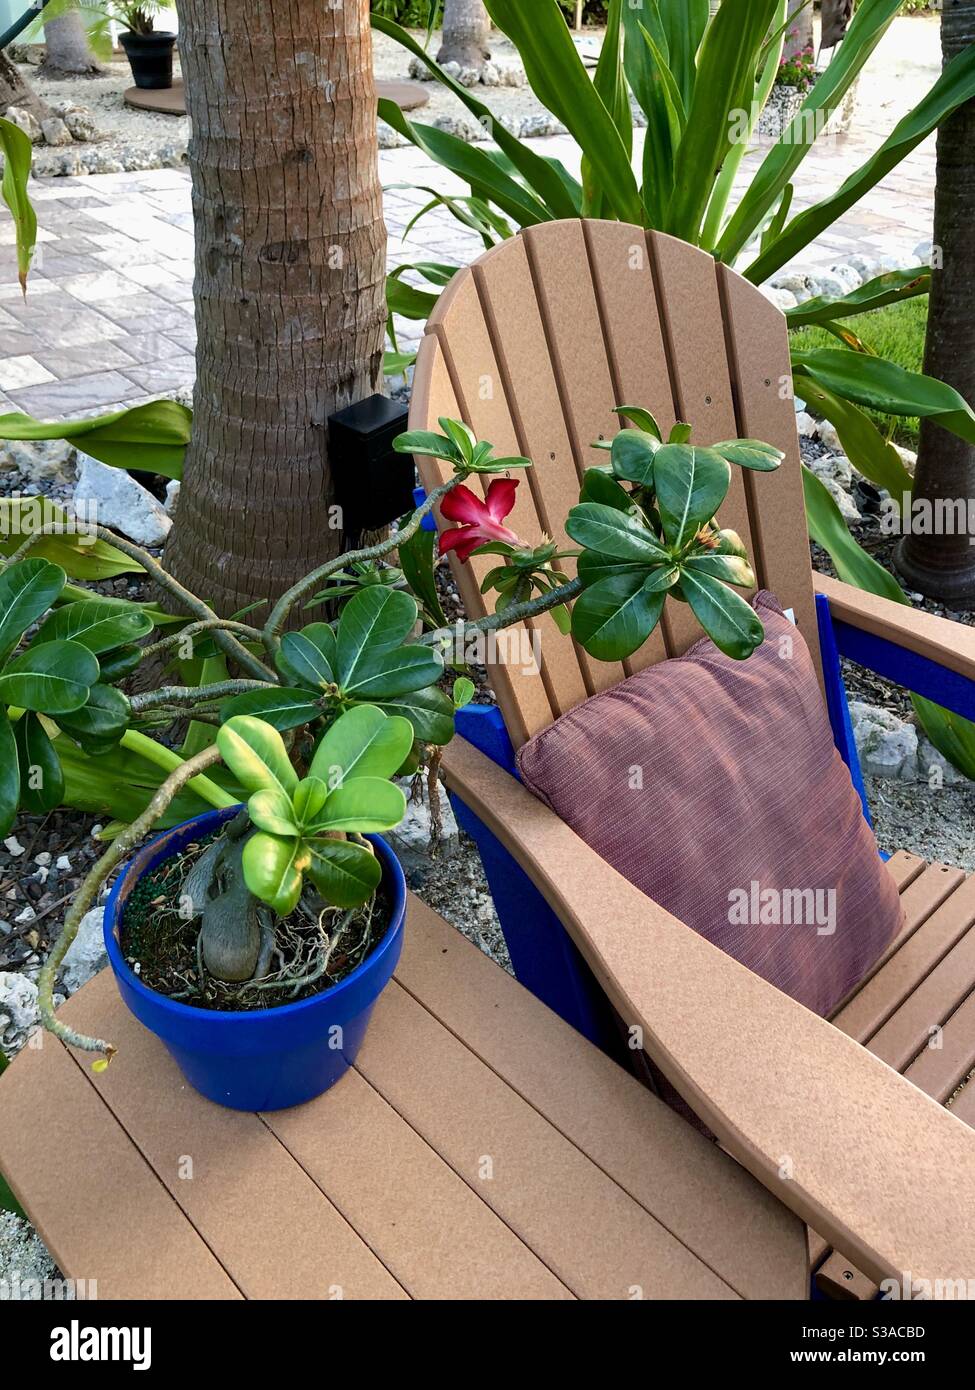 Desert rose in a blue pot next to an Adirondack chair by tropical plants, Key Largo, Florida. Stock Photo